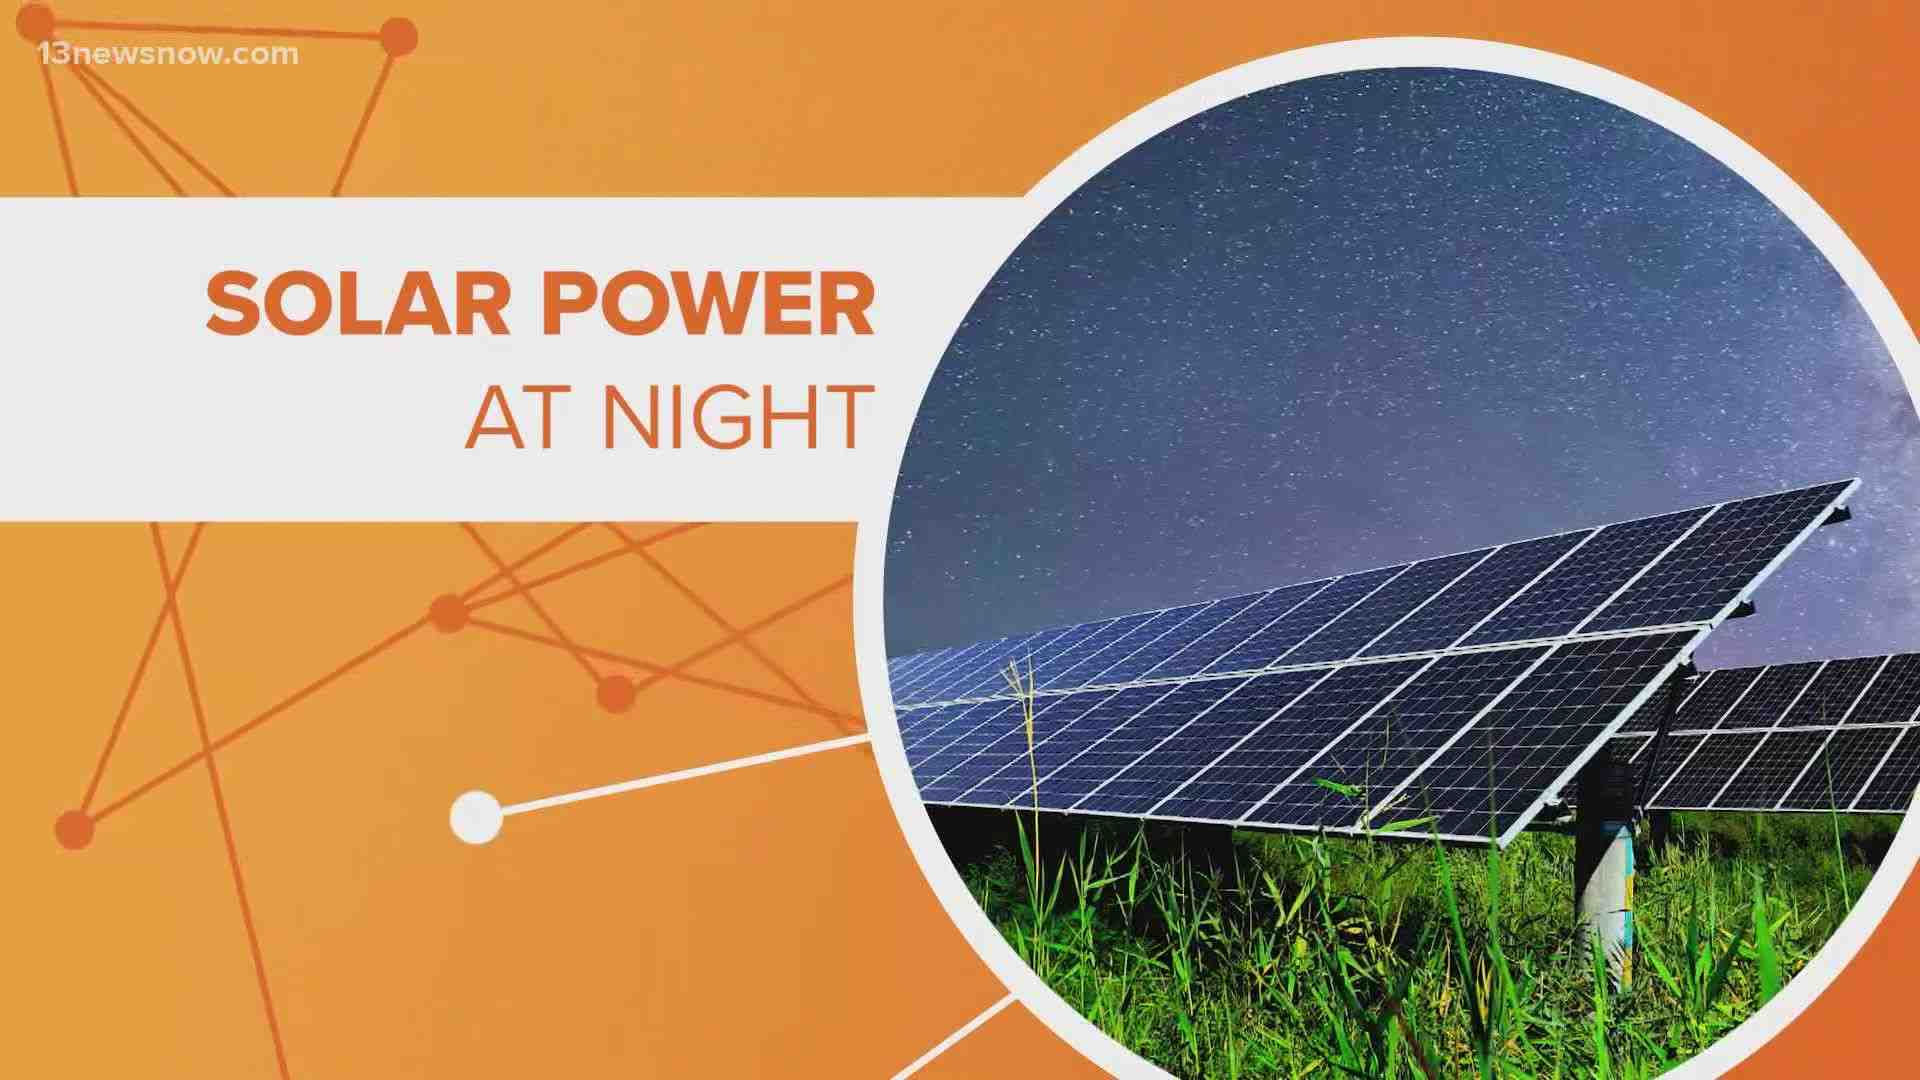 What are 5 ways solar energy is used today?